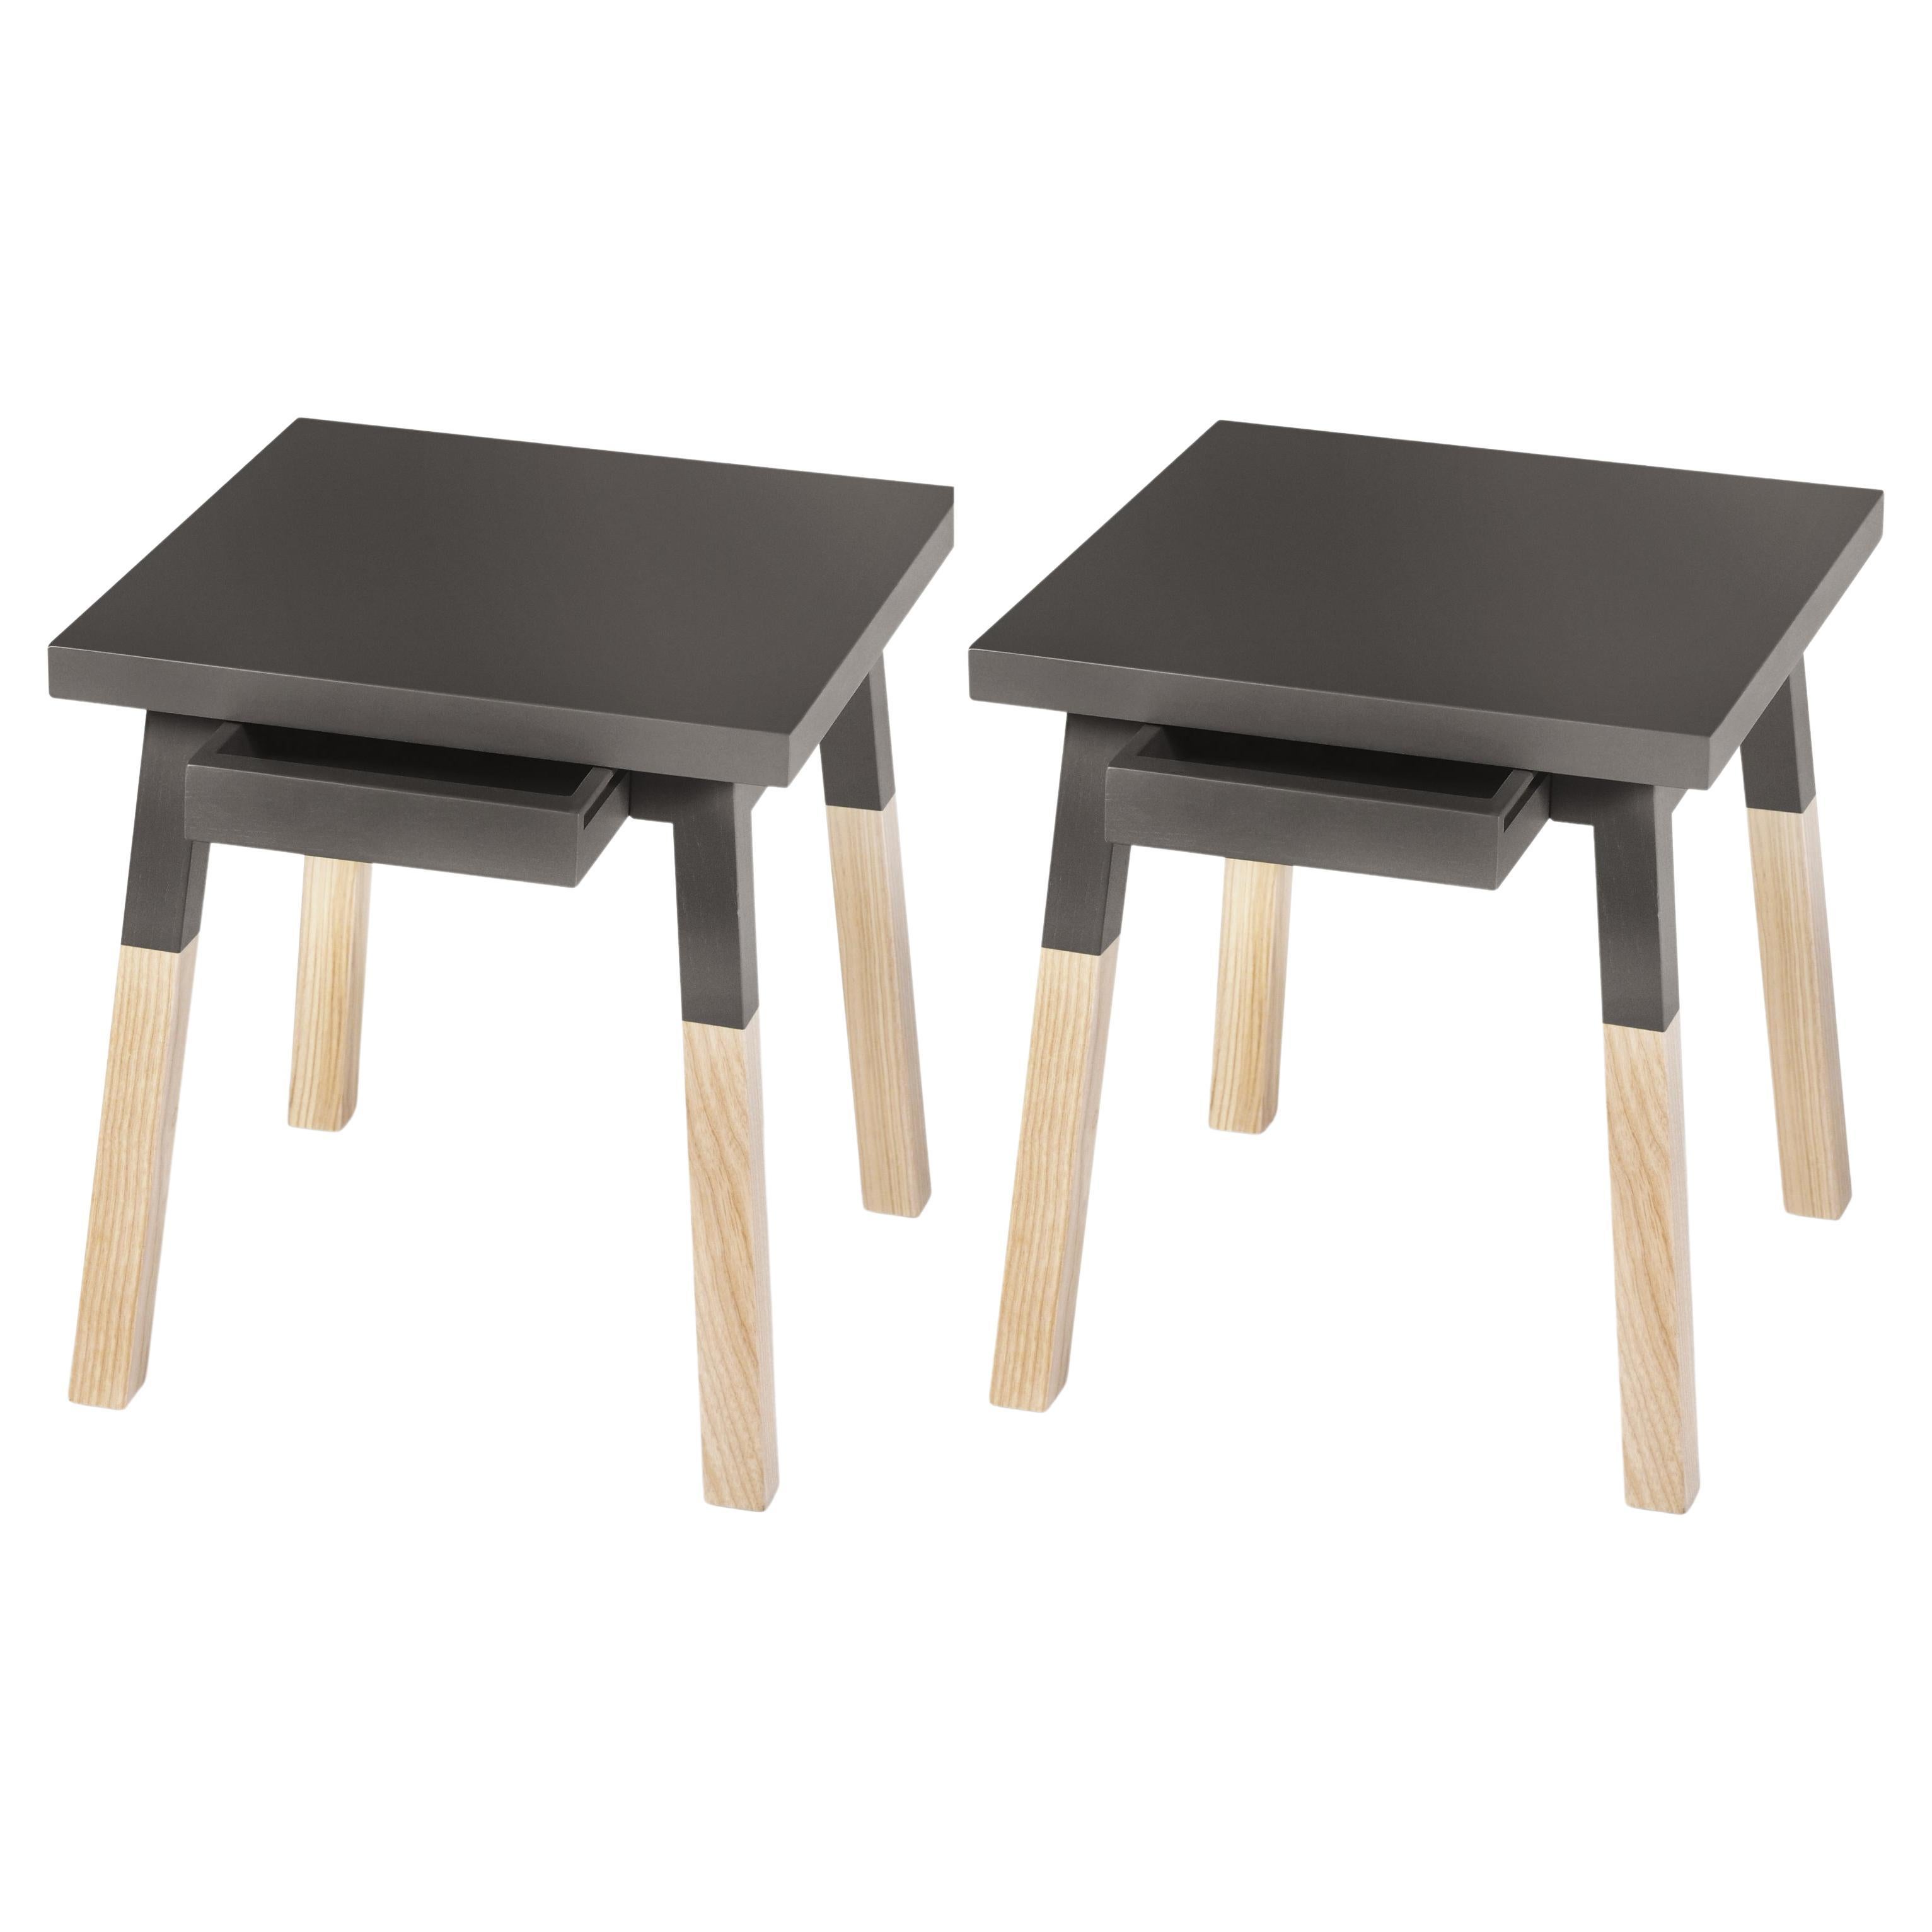 Grey Chocolate bedside tables in Ash Wood, Designer E. Gizard, Paris - pack of 2